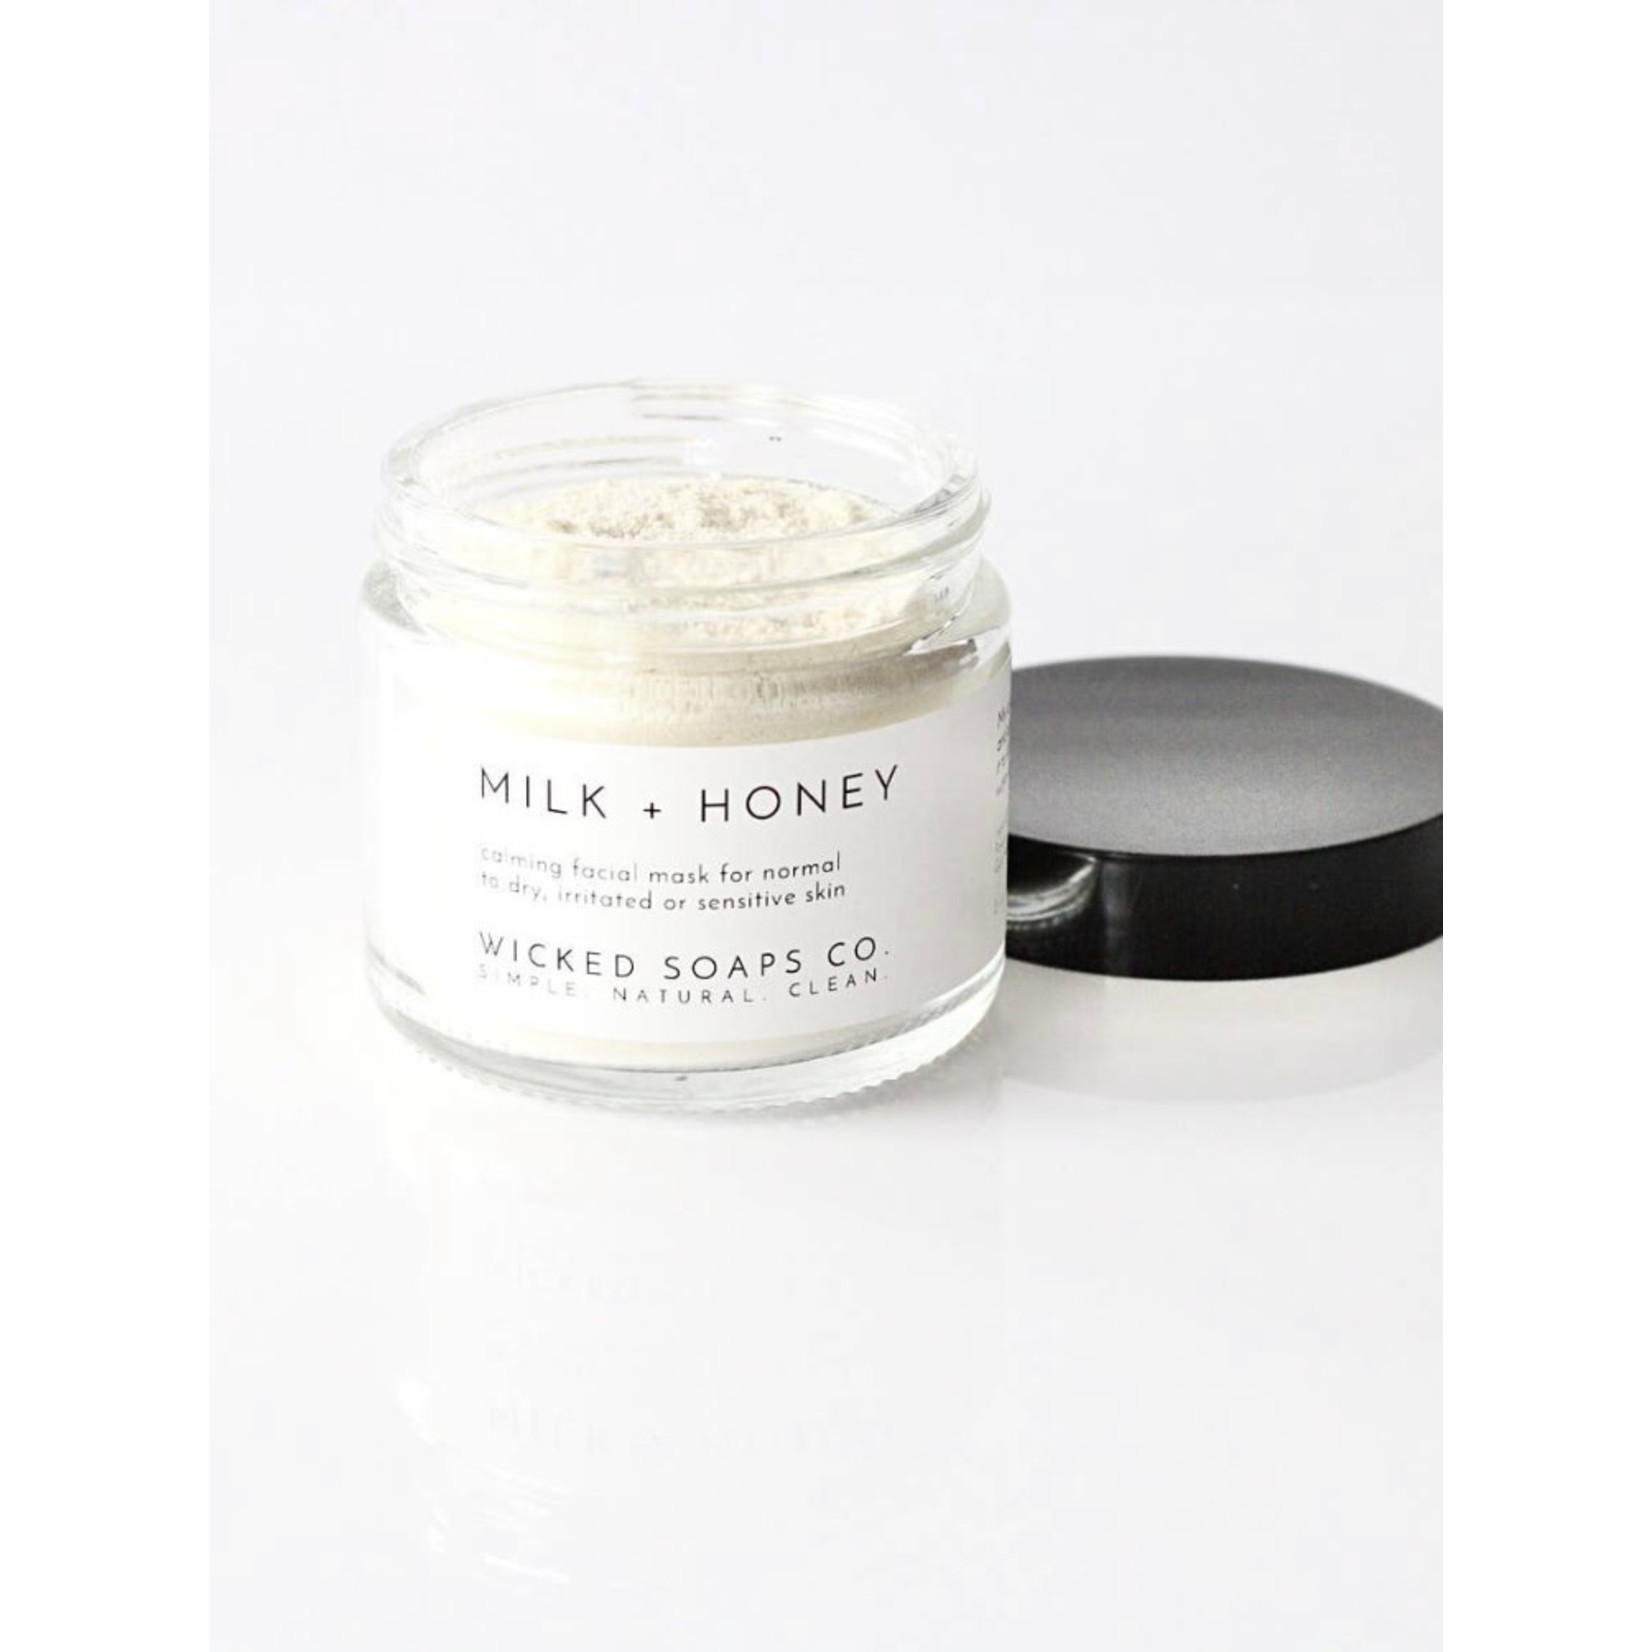 Wicked Soaps Co. MILK + HONEY FACIAL MASK